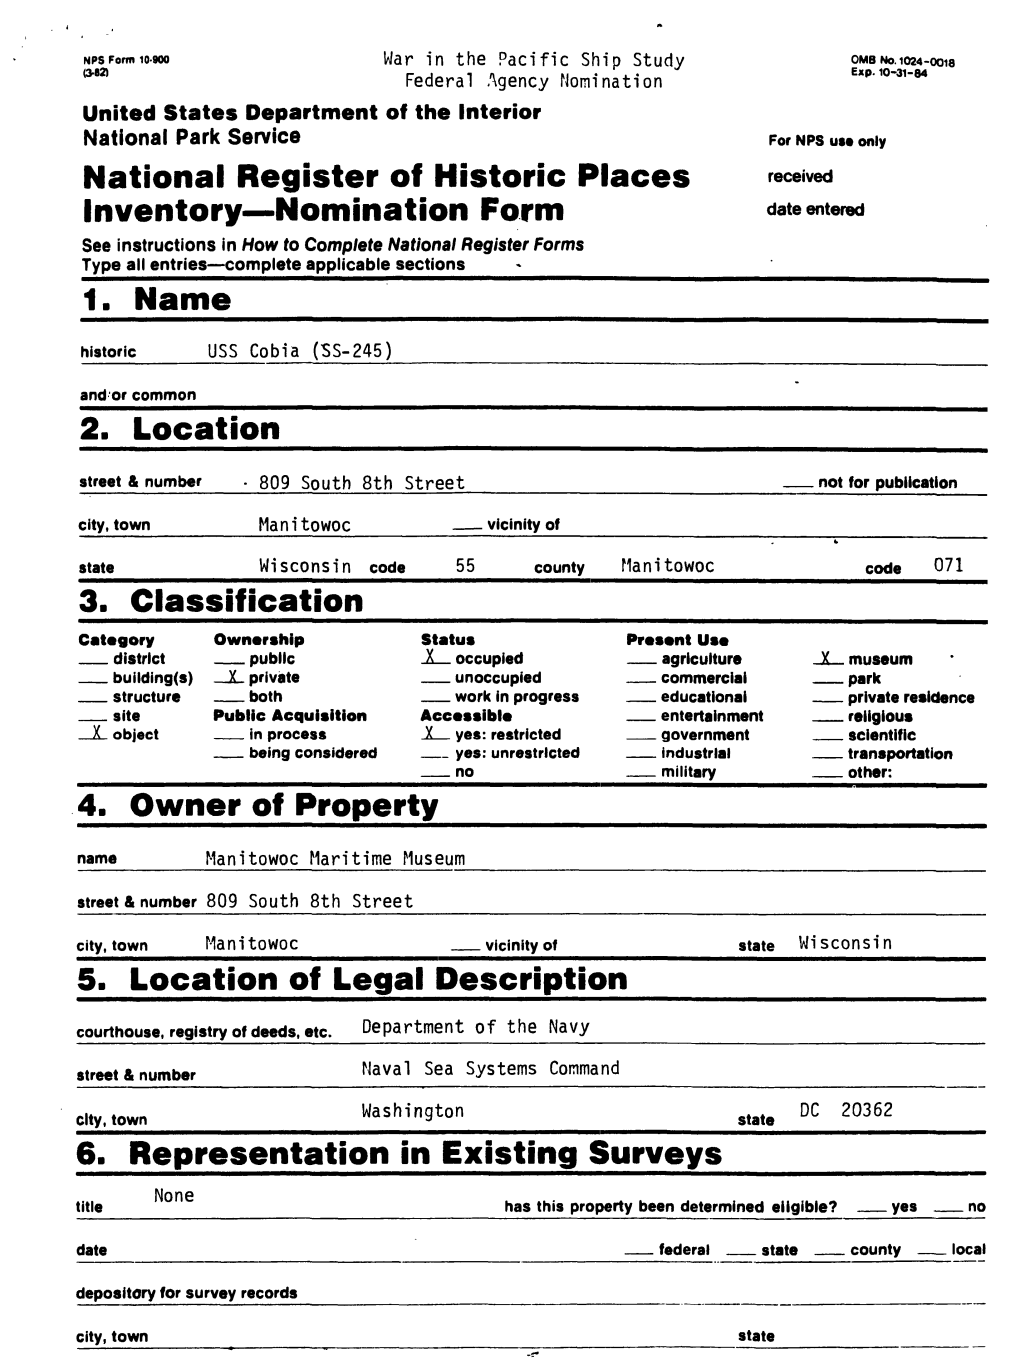 National Register of Historic Places Inventory Nomination Form / USS Cobia (SS-245)